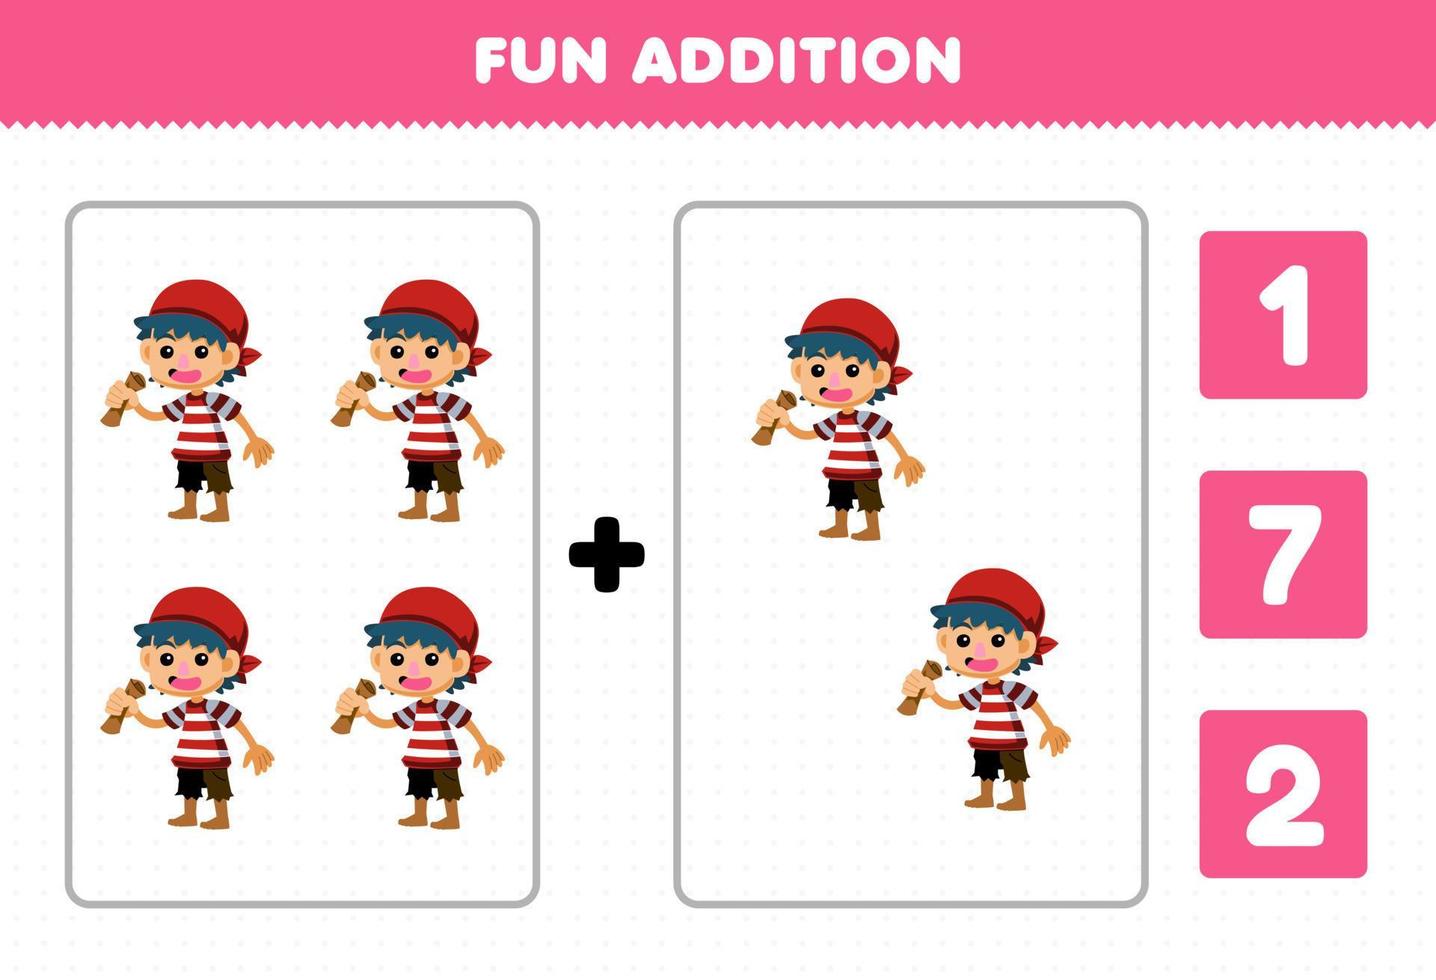 Education game for children fun addition by count and choose the correct answer of cute cartoon boy character printable pirate worksheet vector